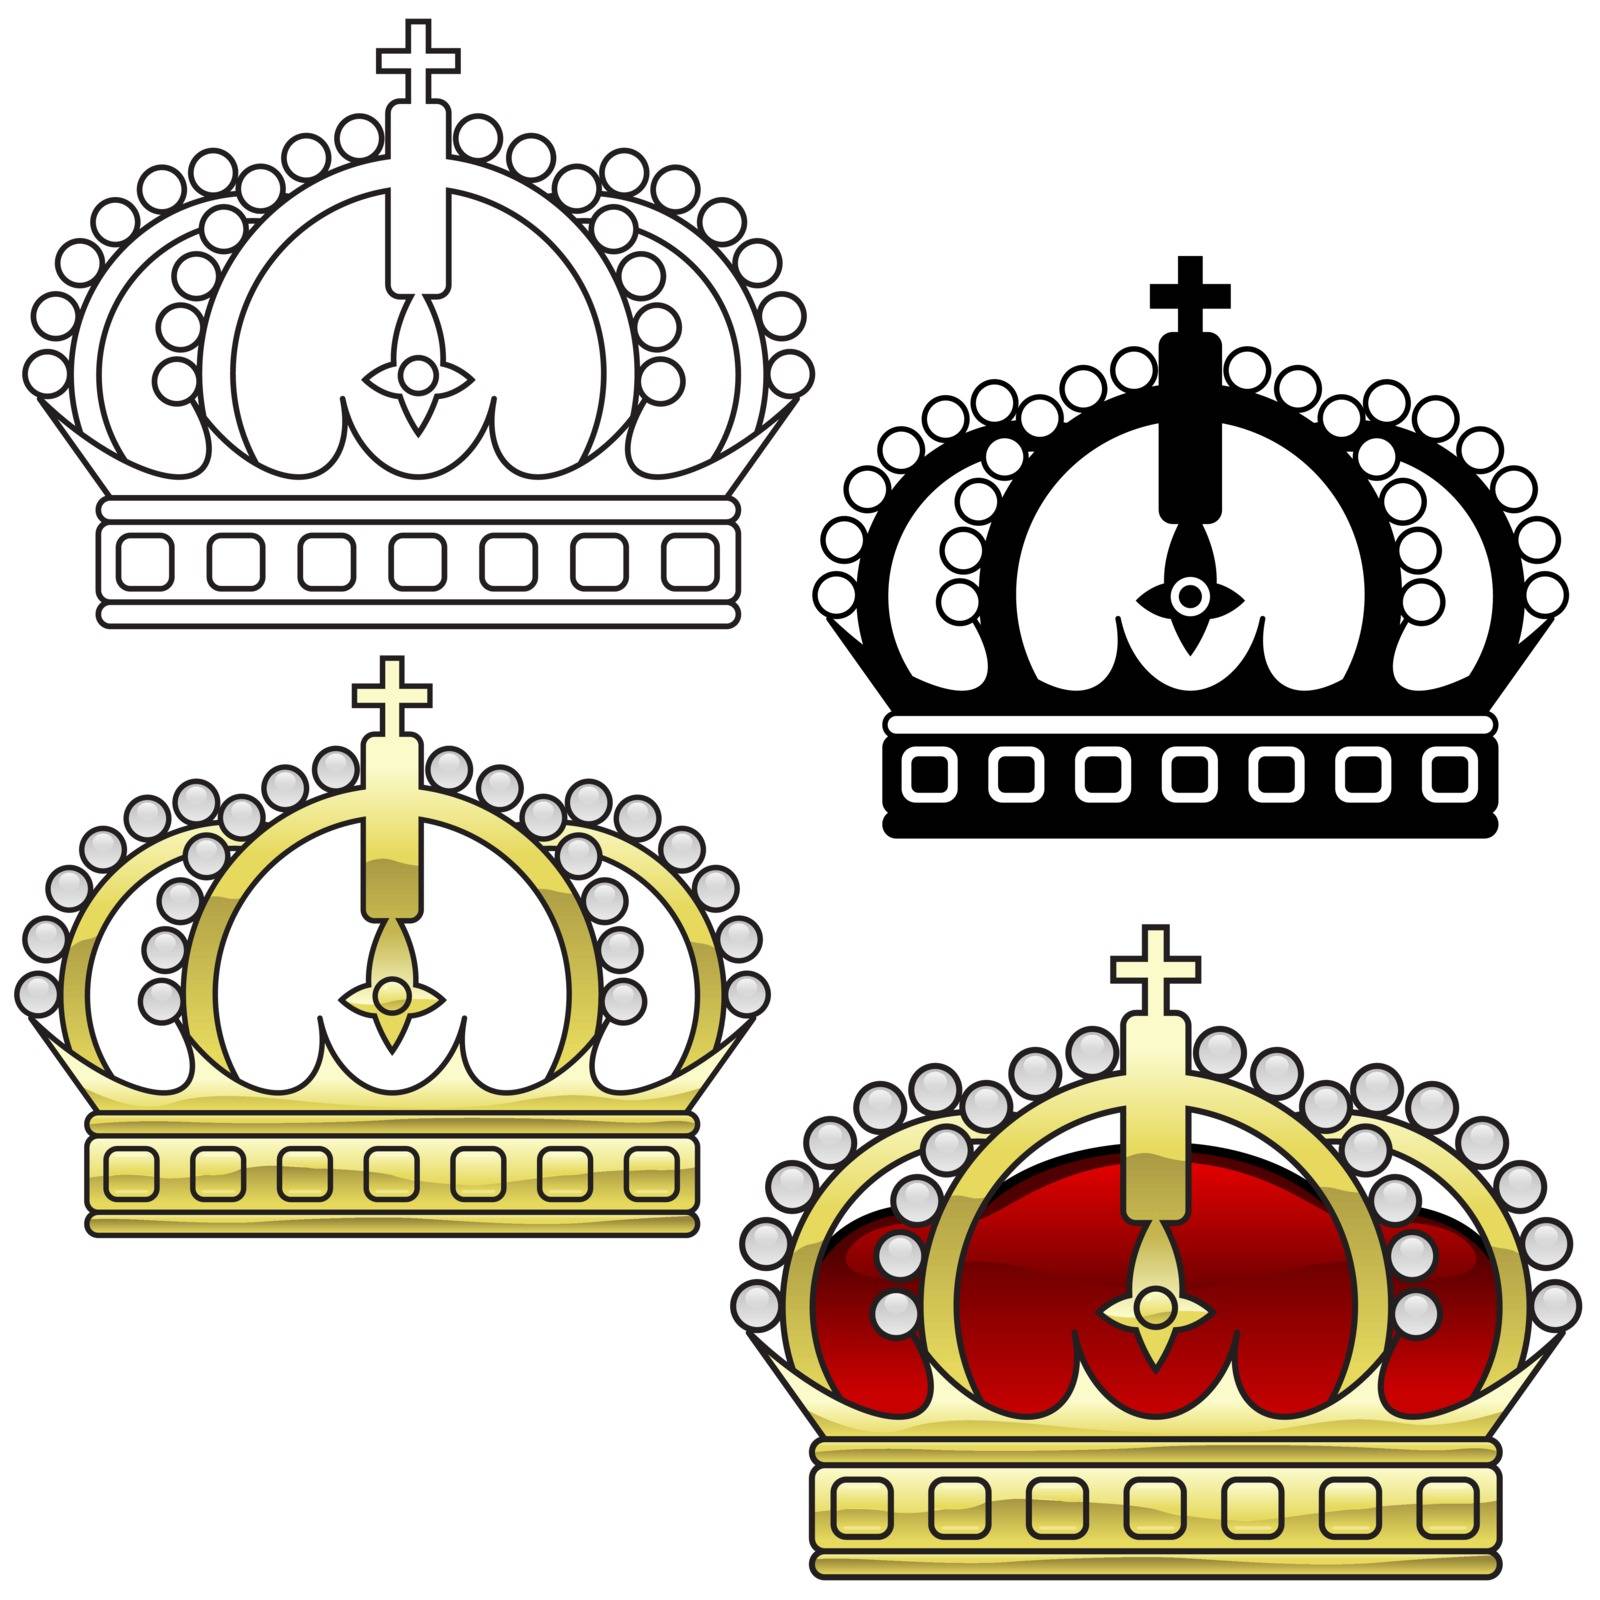 Royal Crown Set - Colored Illustrations, Vector